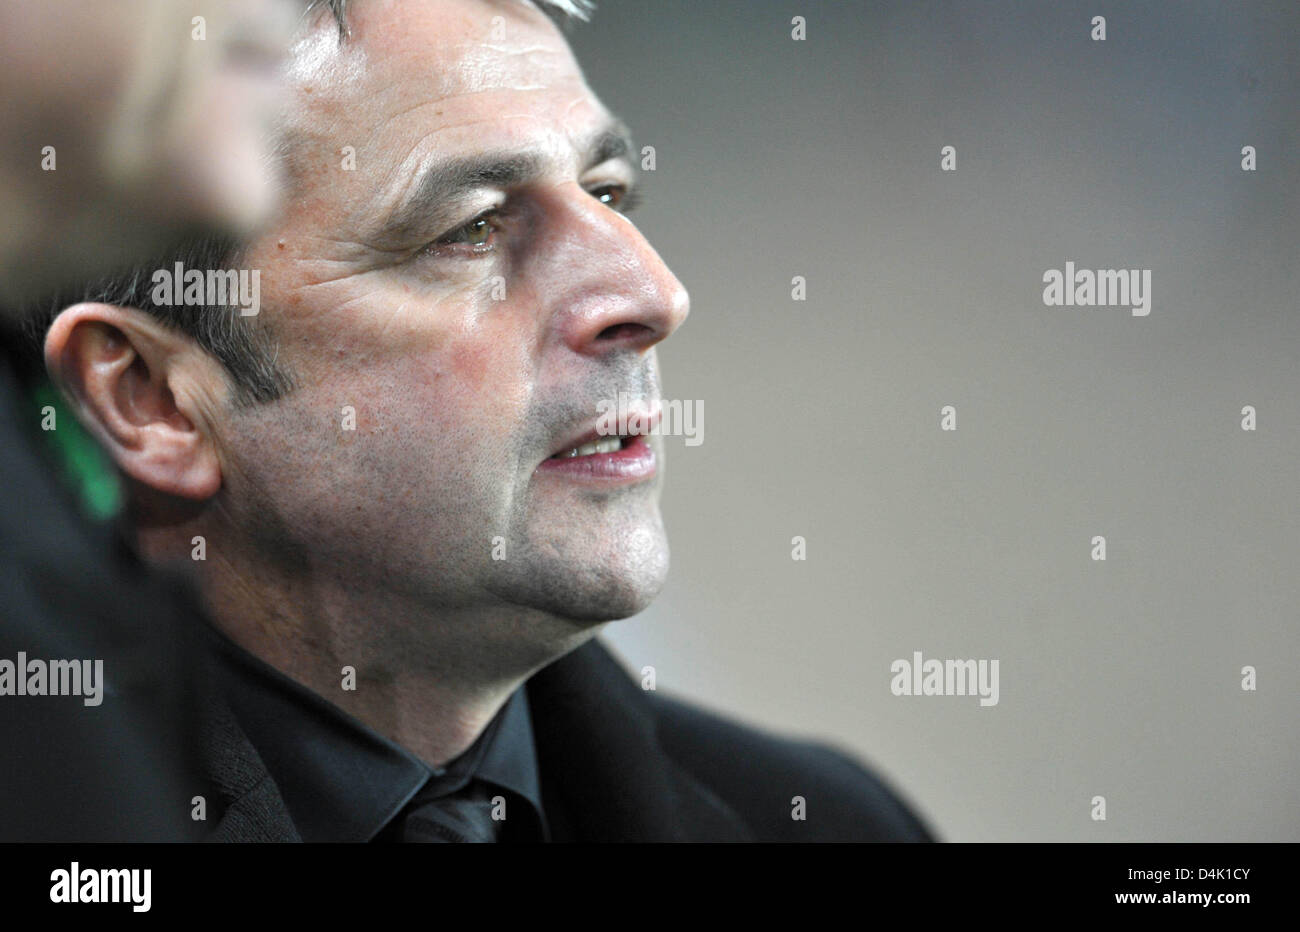 Commercial manager of Werder Bremen, Klaus Allofs, is pictured prior to the UEFA Cup last sixteen return match against AS Saint-Etienne at Stadium Geoffroy Guichard in Saint Etienne, France, 18 March 2009. The game ended in a 2-2 tie with Bremen qualifying for the quarter-finals. Photo: Carmen Jaspersen Stock Photo